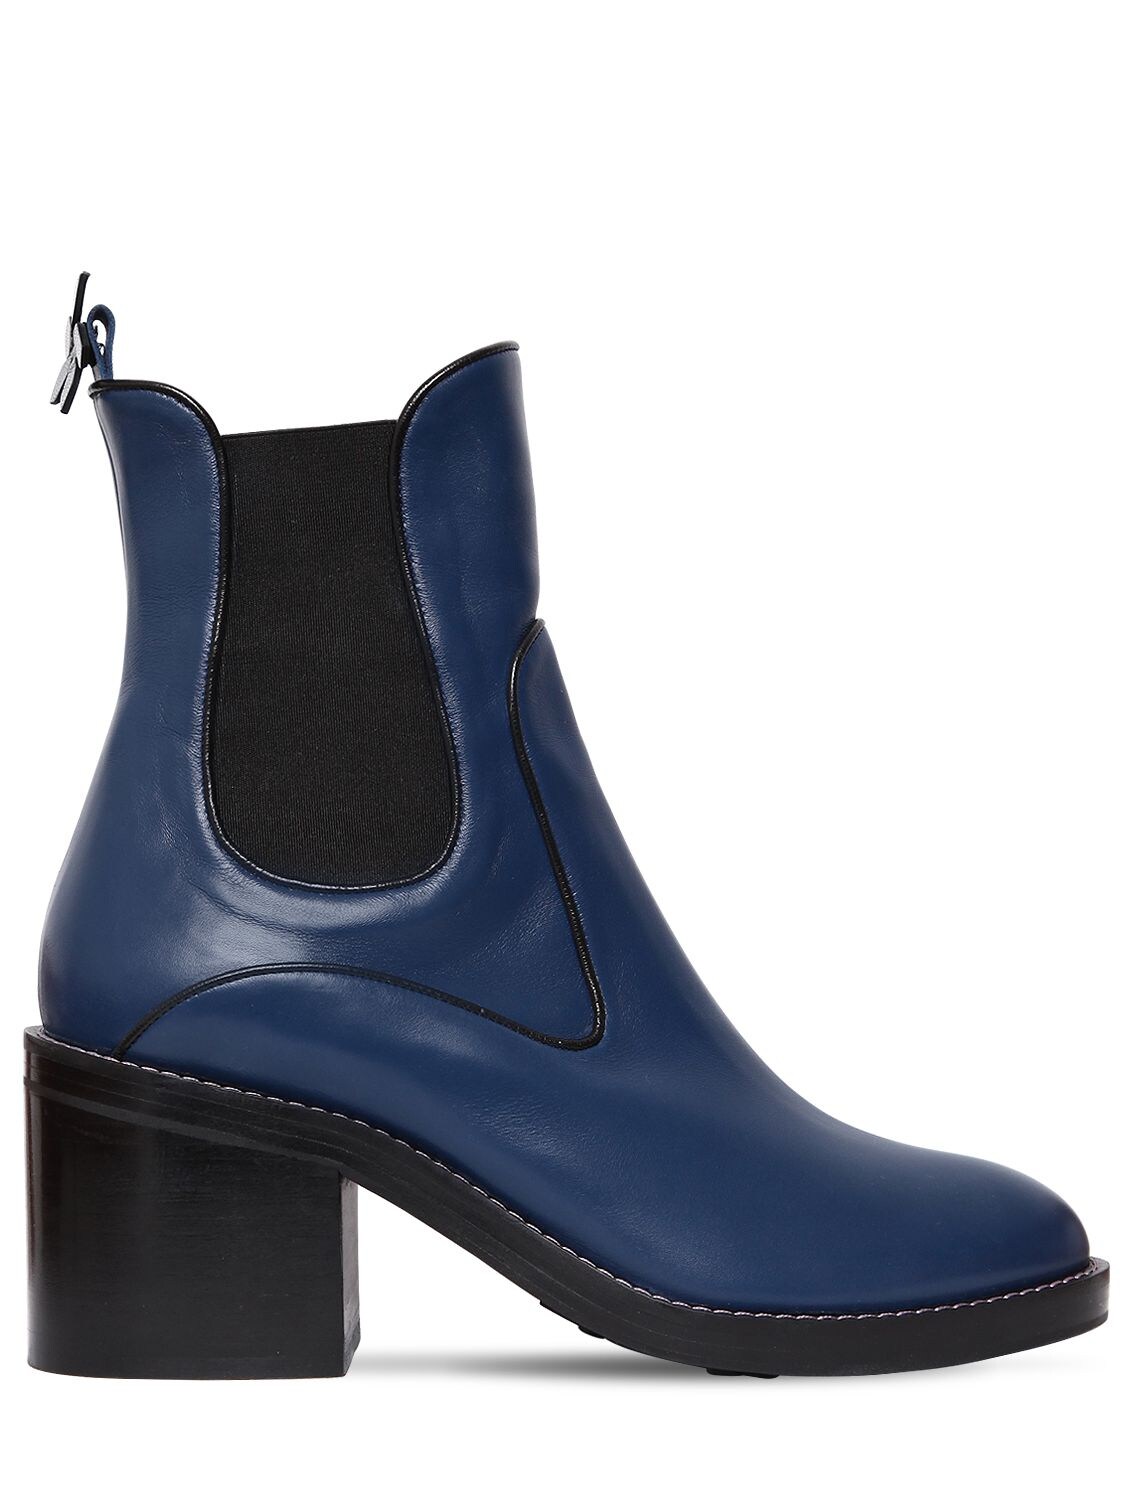 Fabrizio Viti 75mm Madison Leather Chelsea Boots In Navy